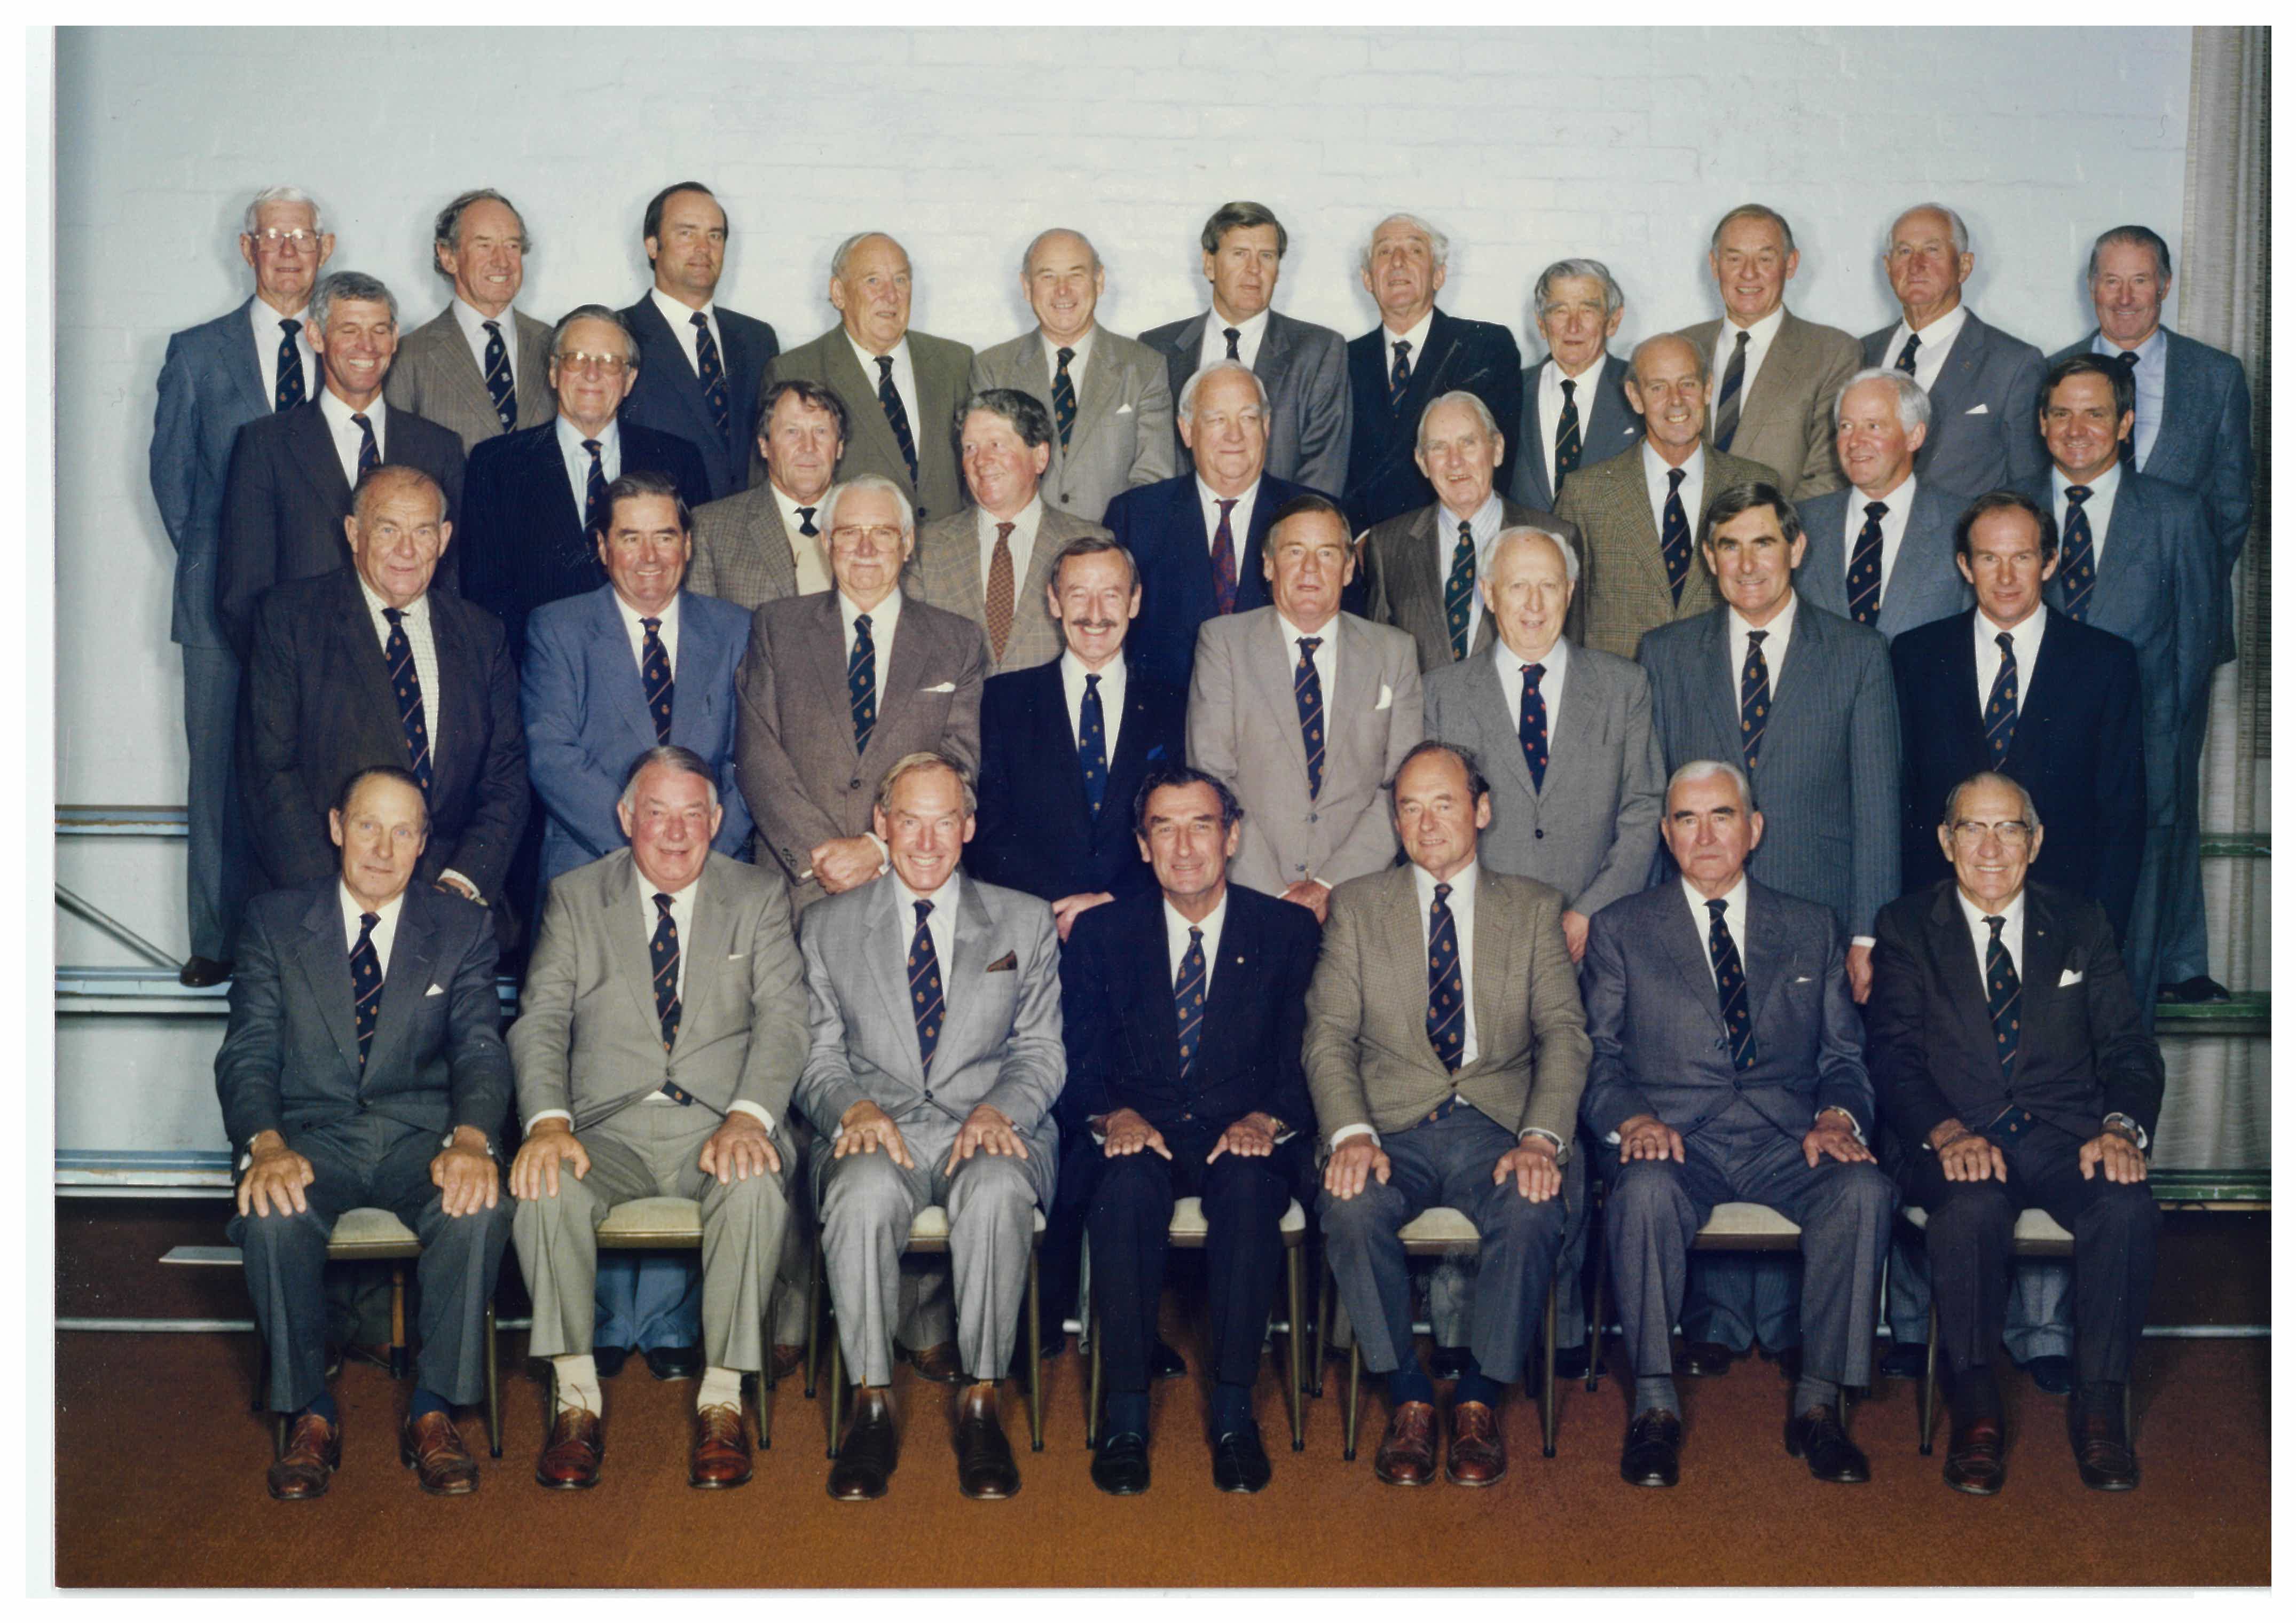 May 1988 Council Meeting. Sir Rupert Clarke is in the upper middle row, second from left. Photo source: Melbourne Royal Heritage Collection.